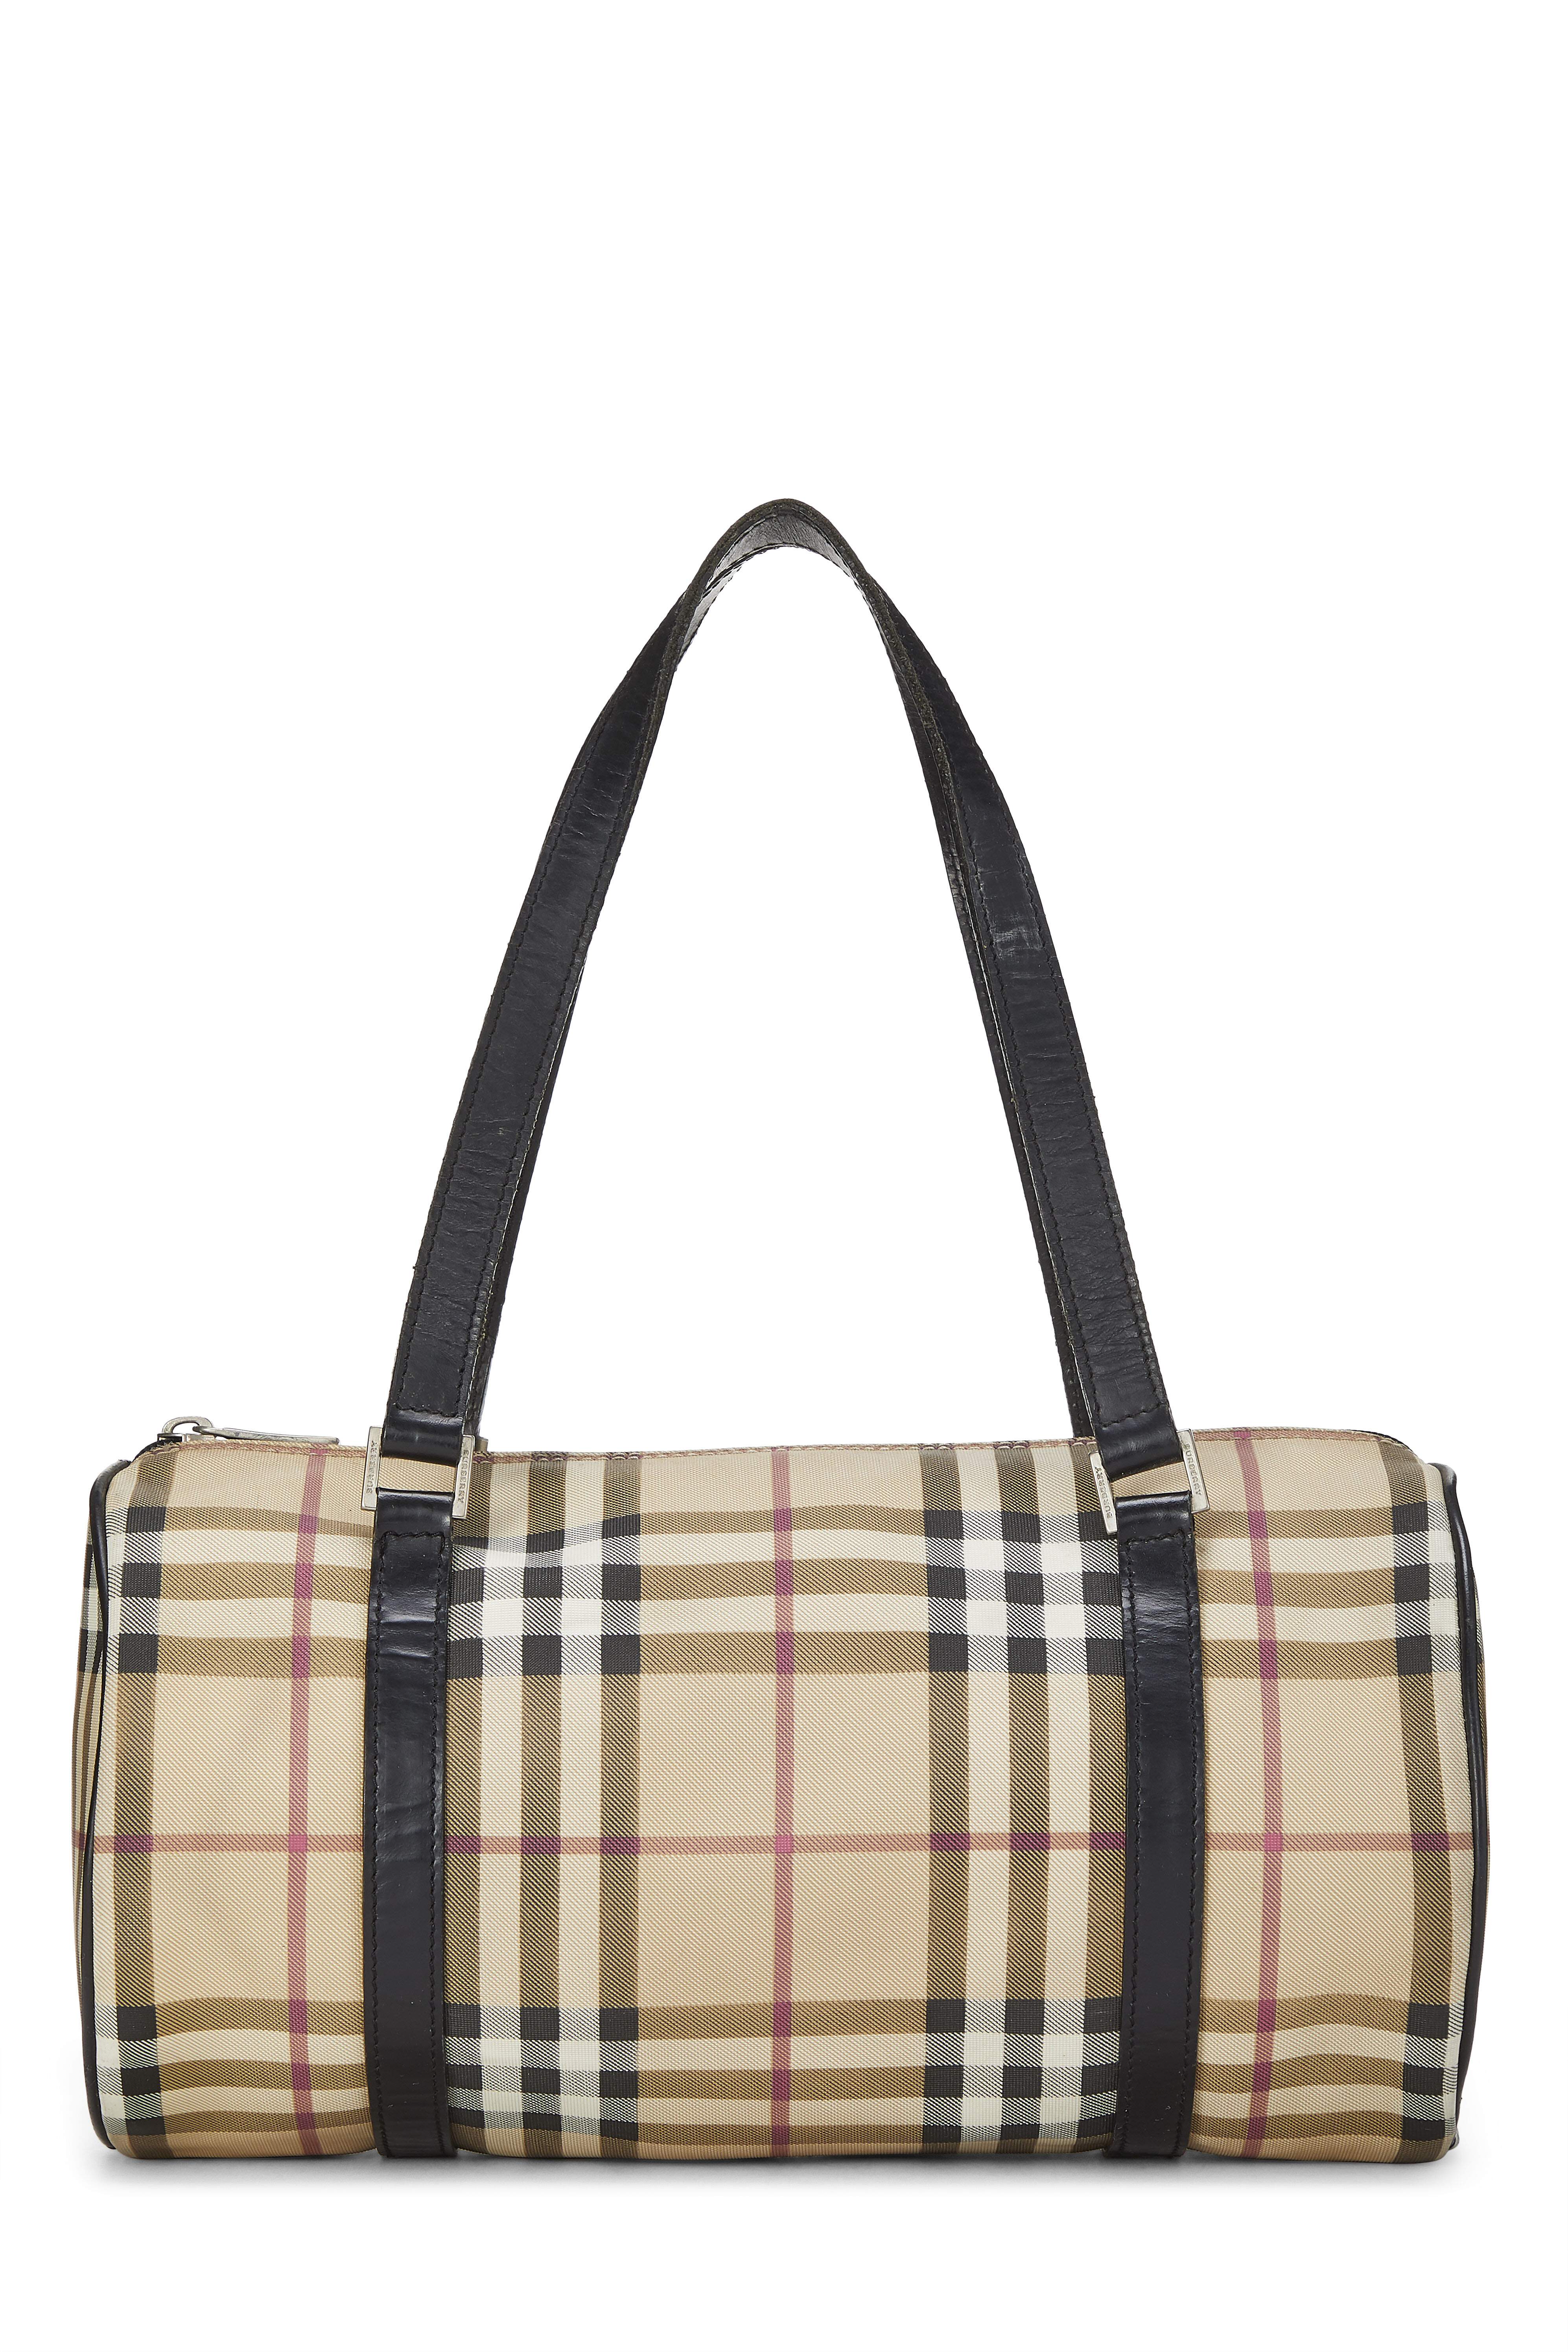 Burberry Navy Blue/Black London Check Coated Canvas Beckley Slim